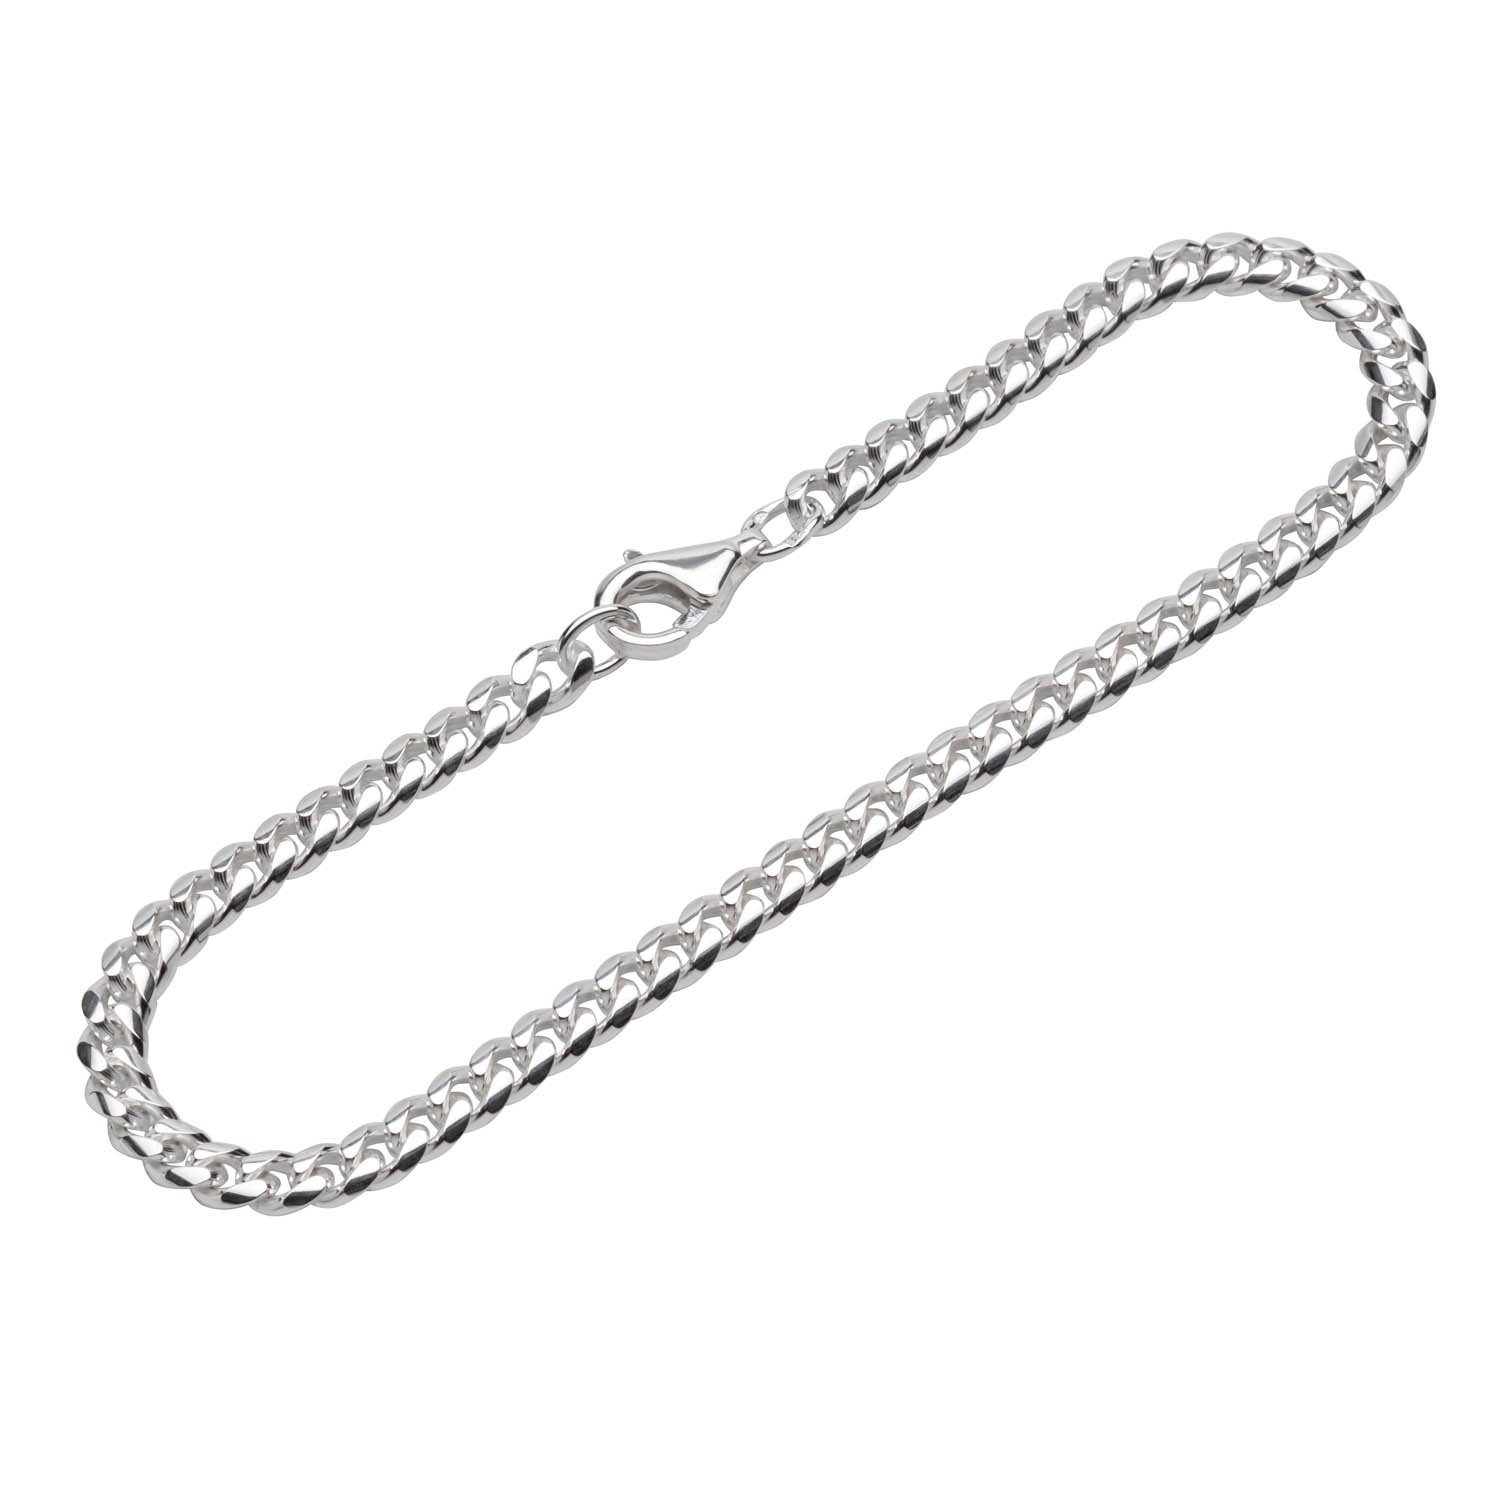 NKlaus Silberarmband Armband 925 Sterling Silber 19cm Panzerkette oval (1 Stück), Made in Germany